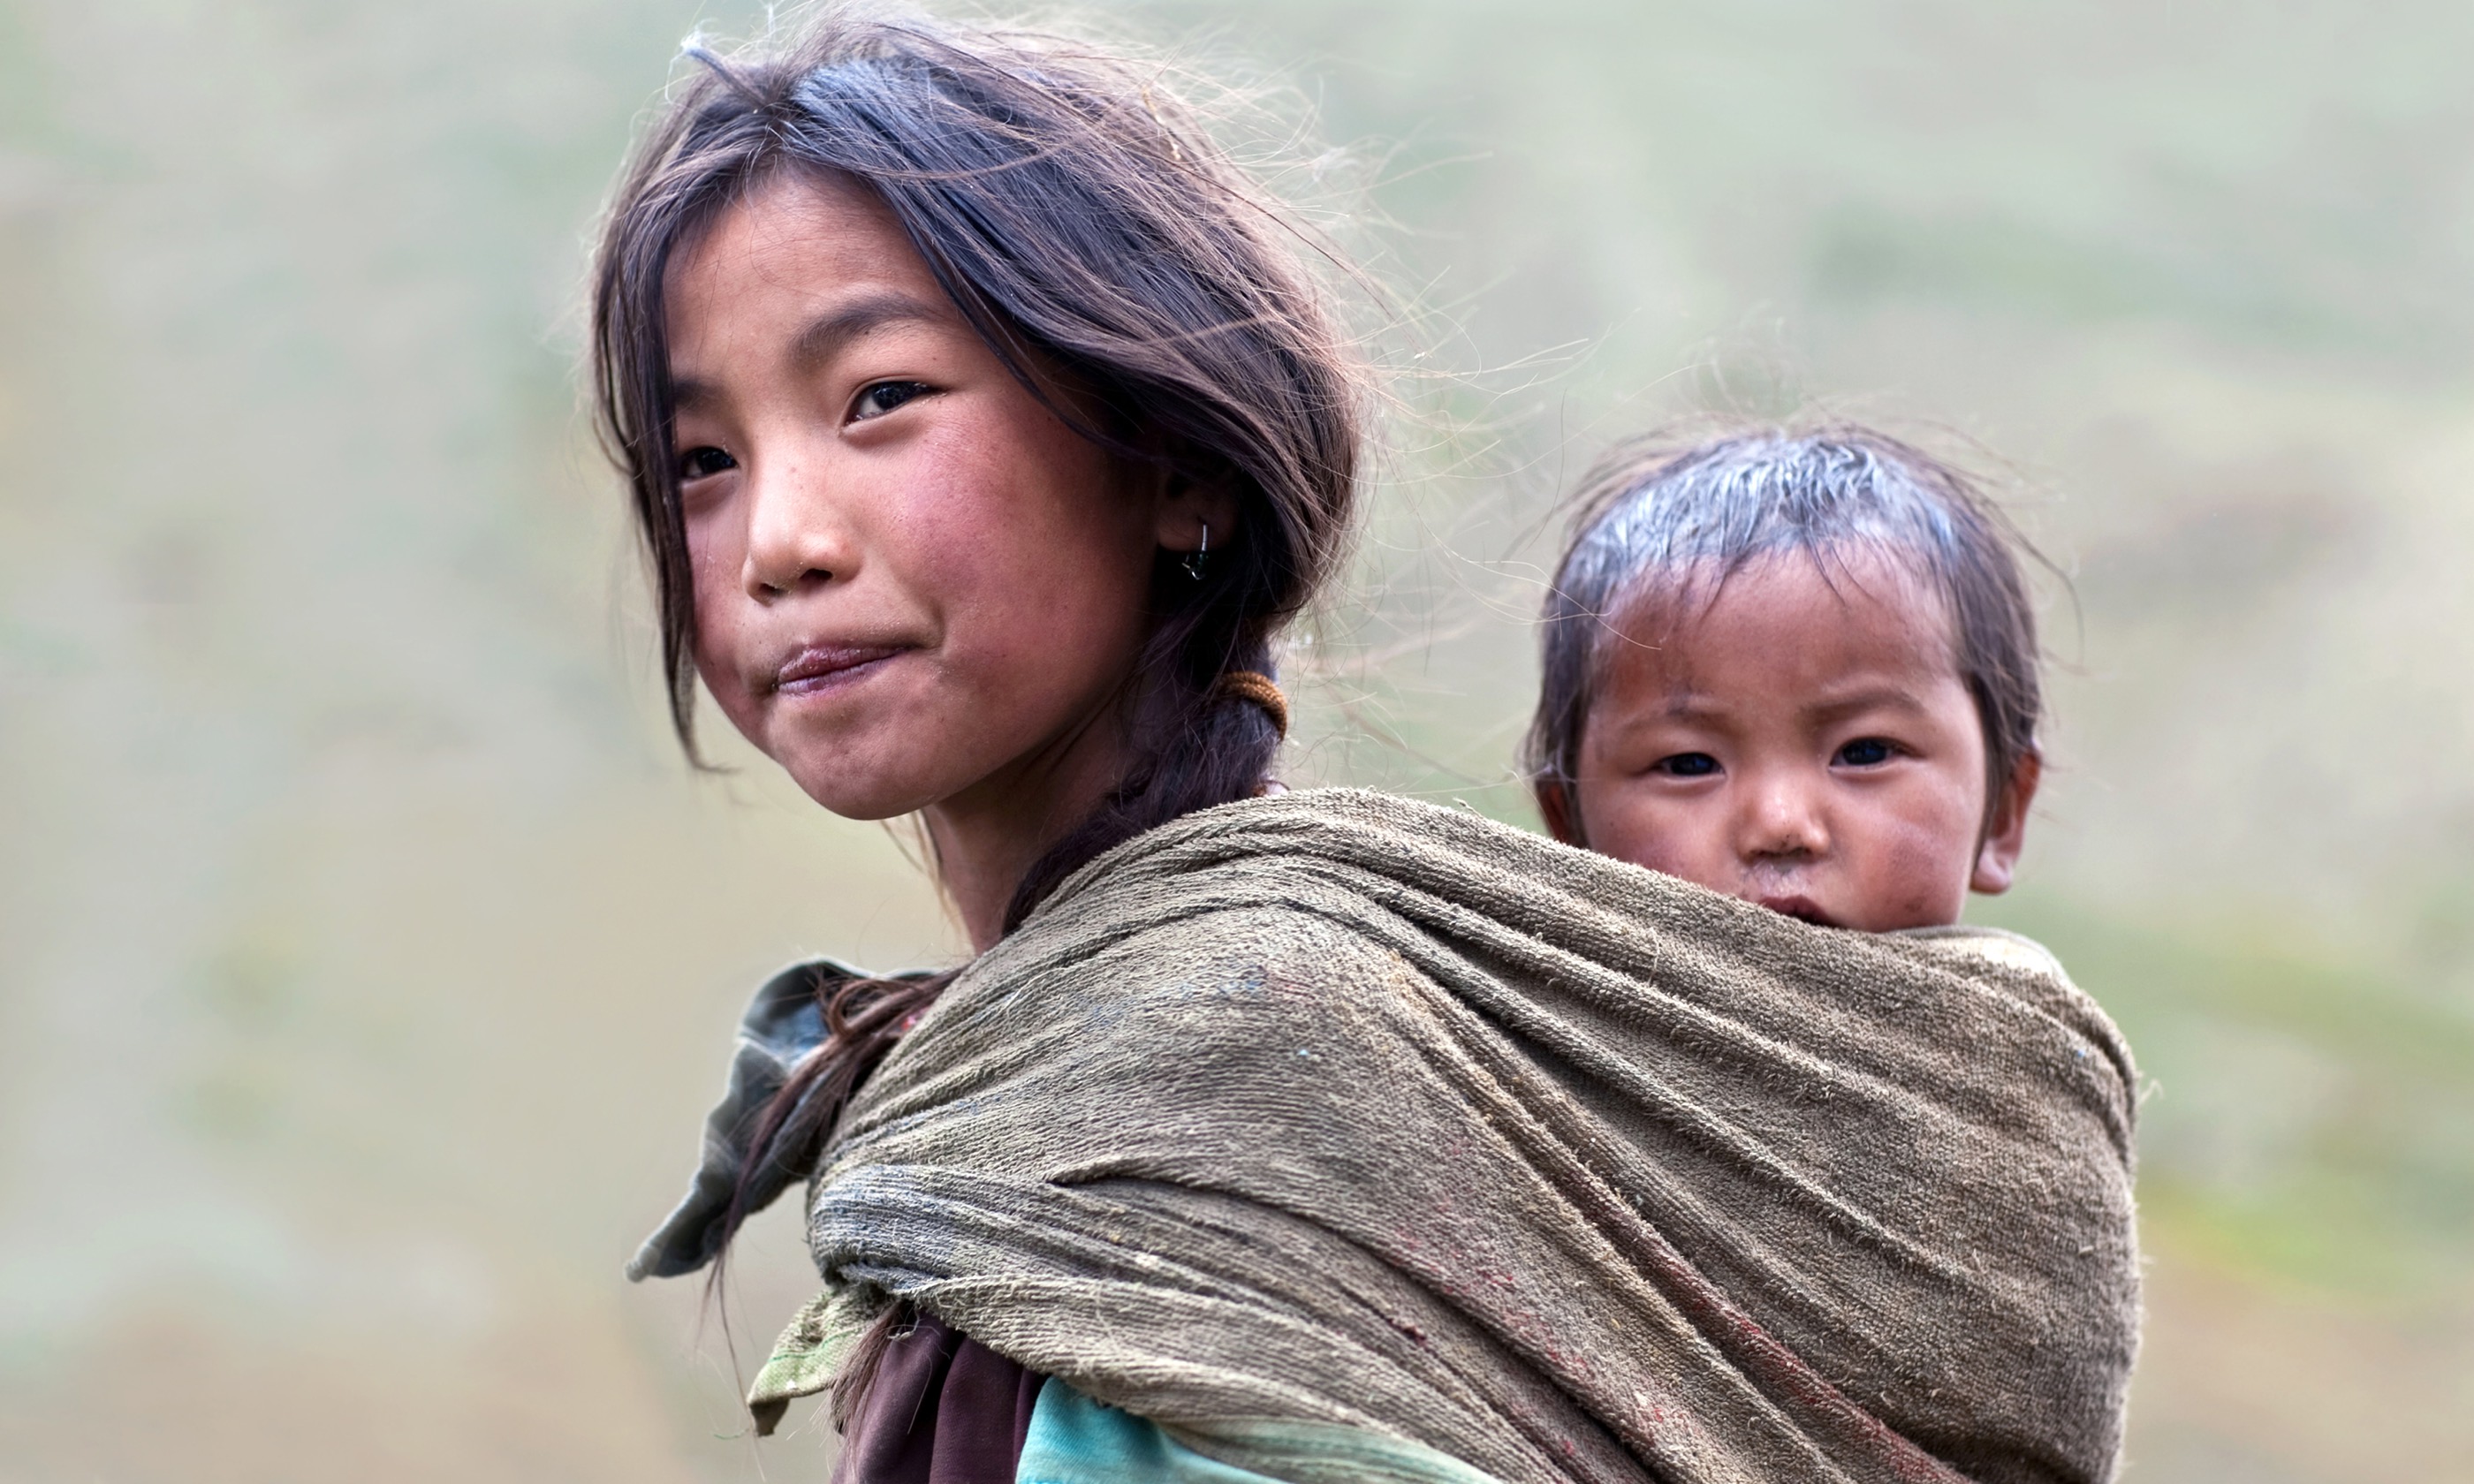 Nepalese girl on the trail (Shutterstock.com)